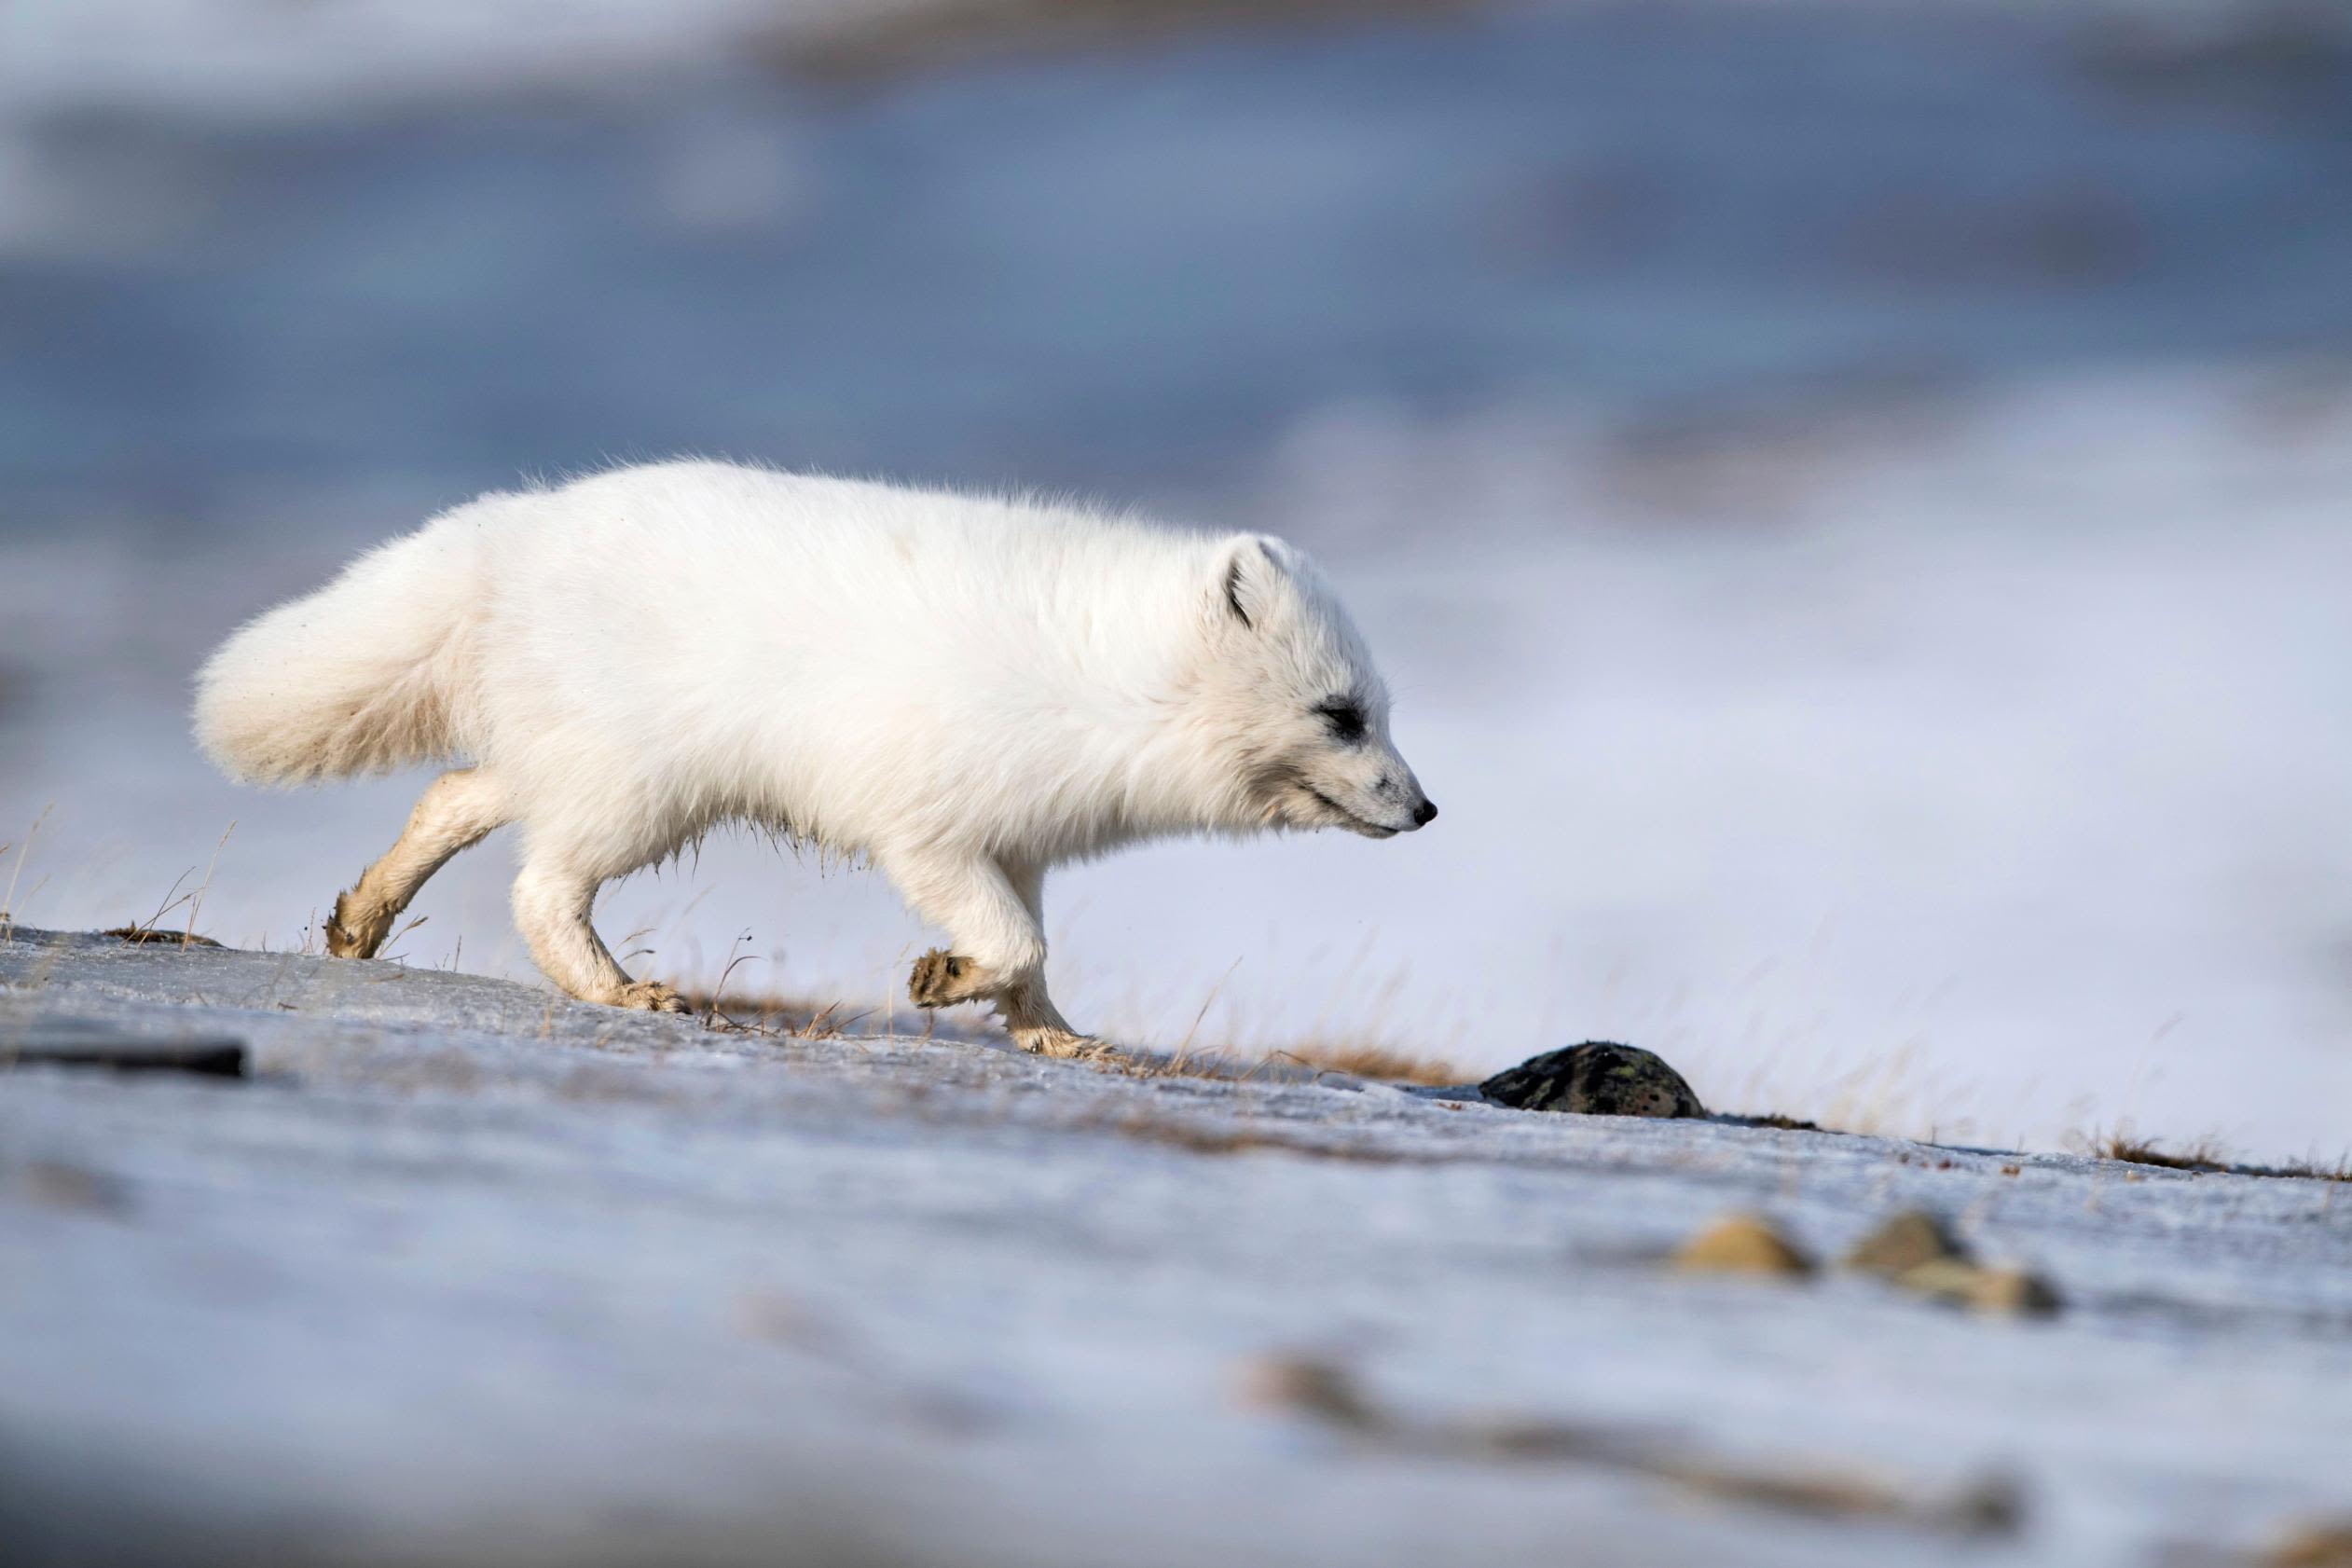 Arctic foxes scavenged leftovers from humans 42,000 years ago